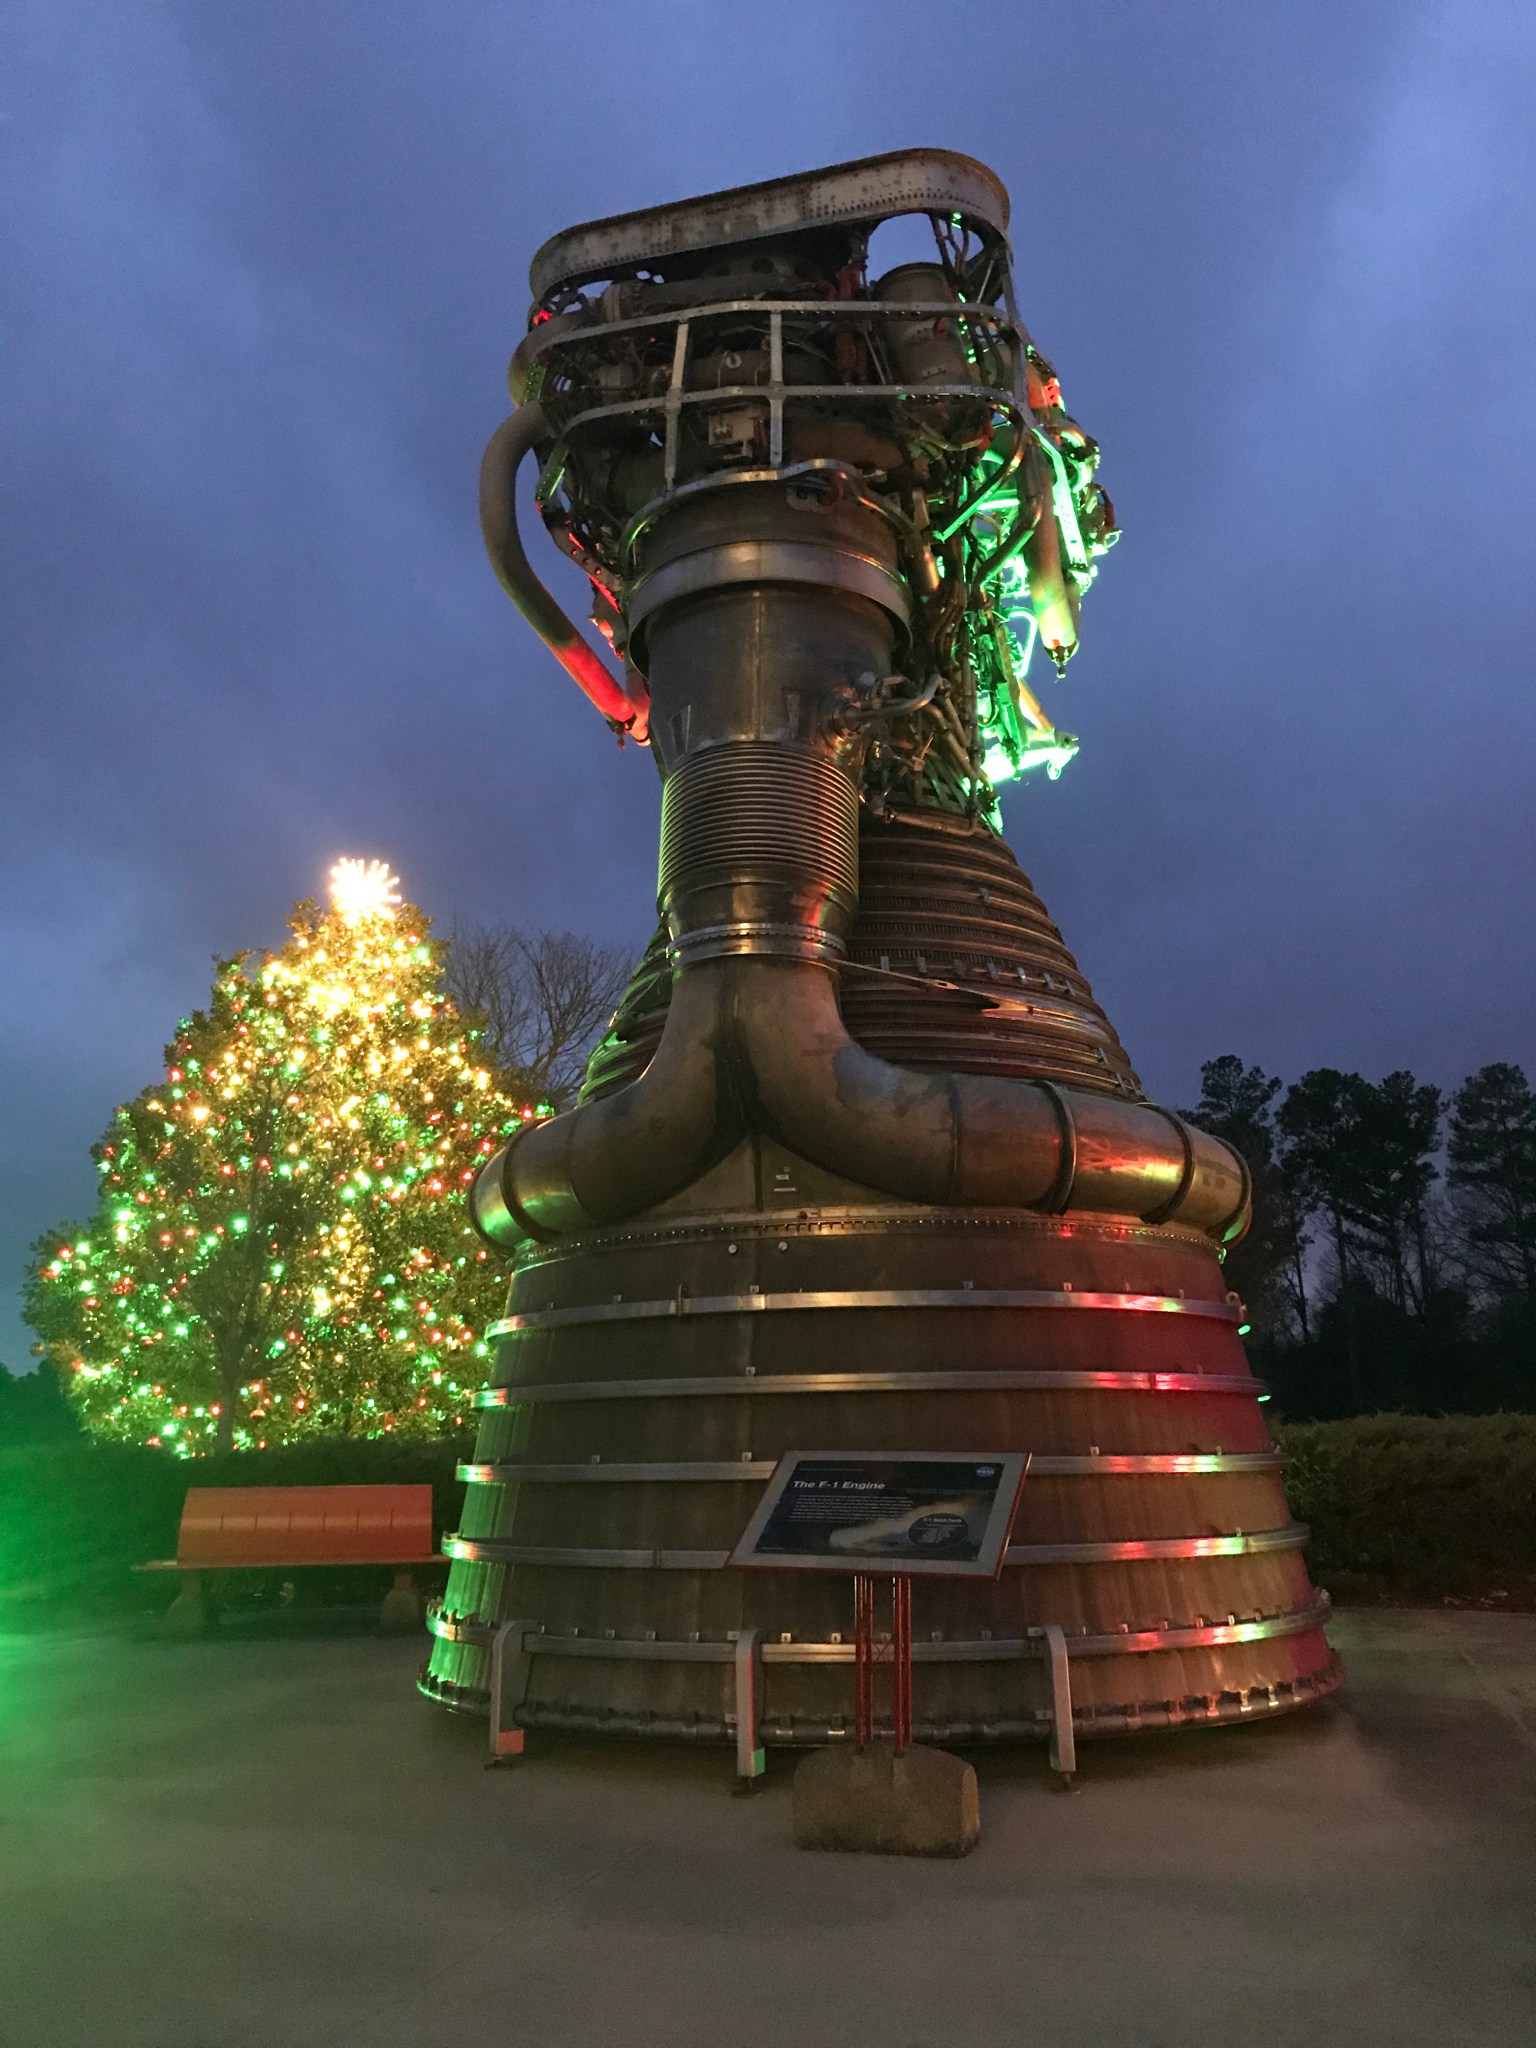 NASA’s Marshall Space Flight Center team members usher in the season Dec. 9 with the lighting of the Marshall holiday tree.